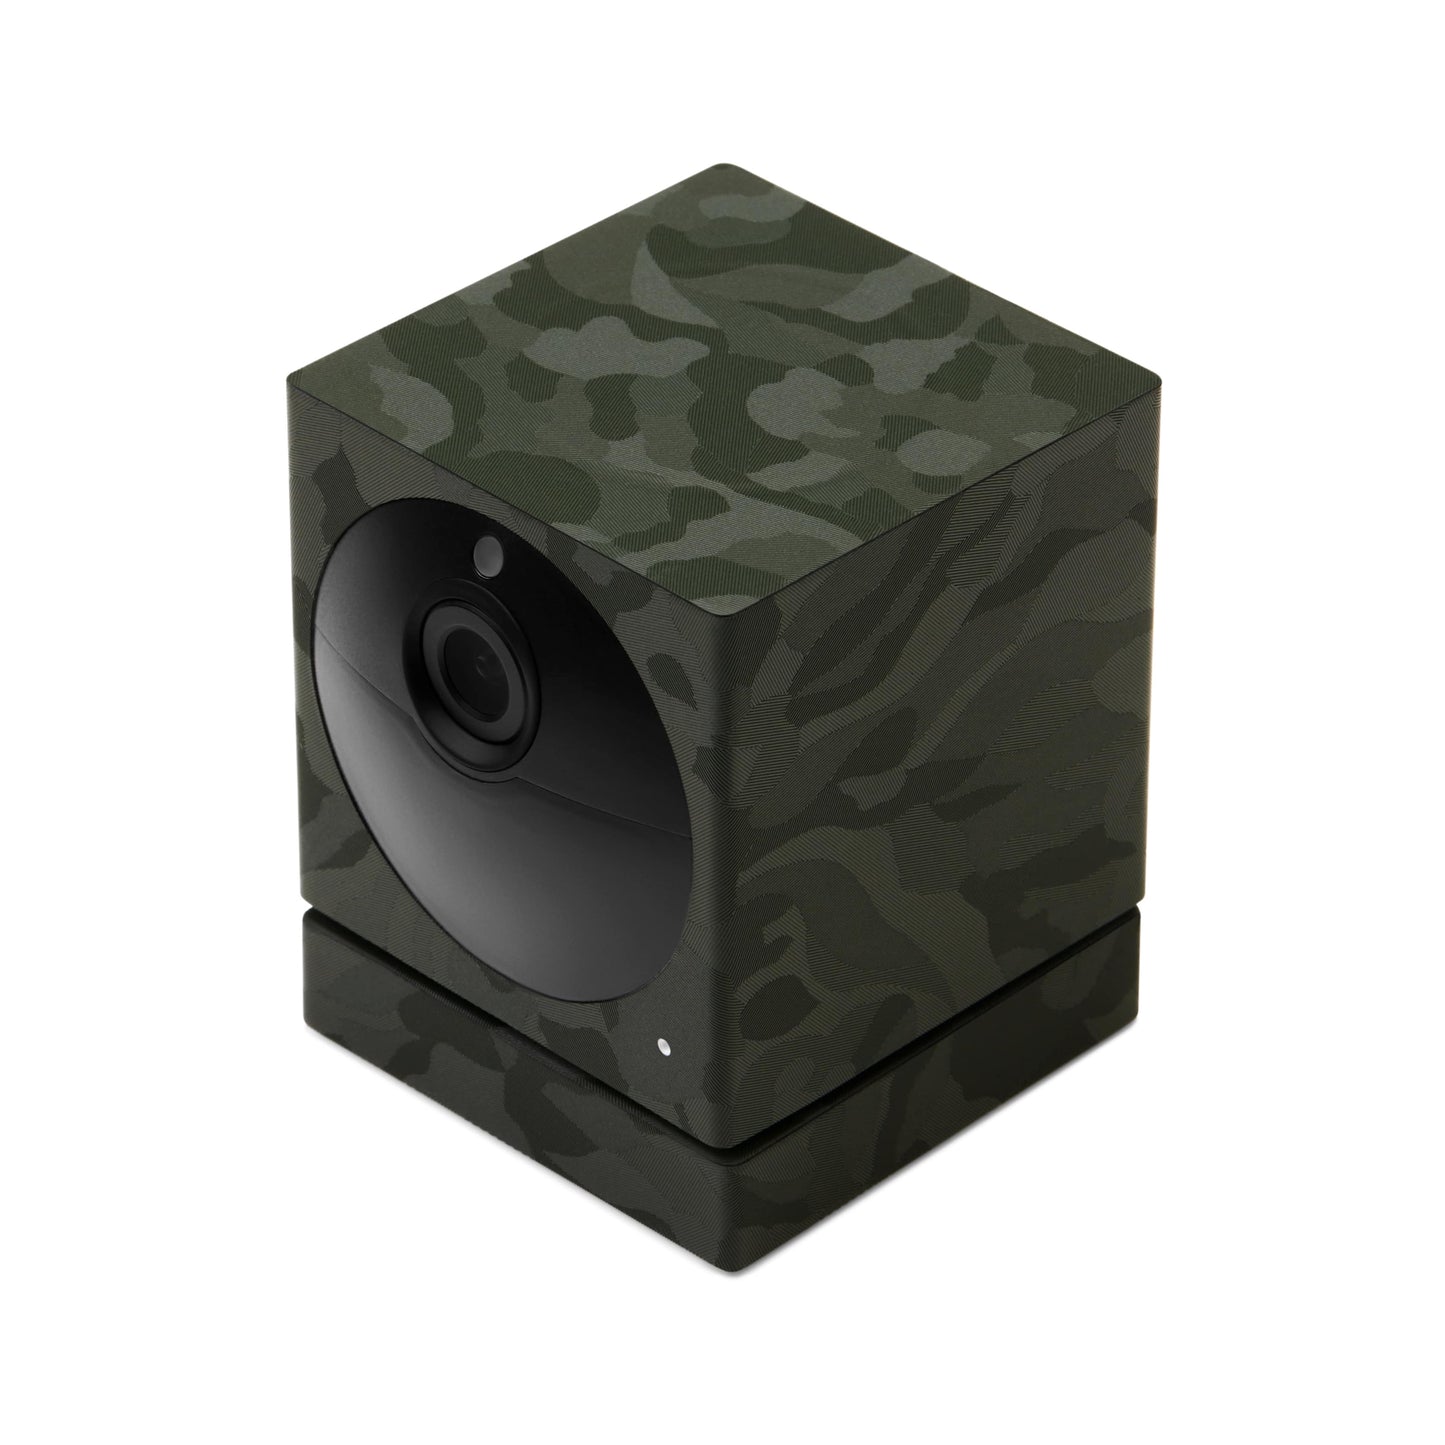 Top angle of green camo adhesive skin (sticker wrap) covering for Wyze Cam Outdoor.